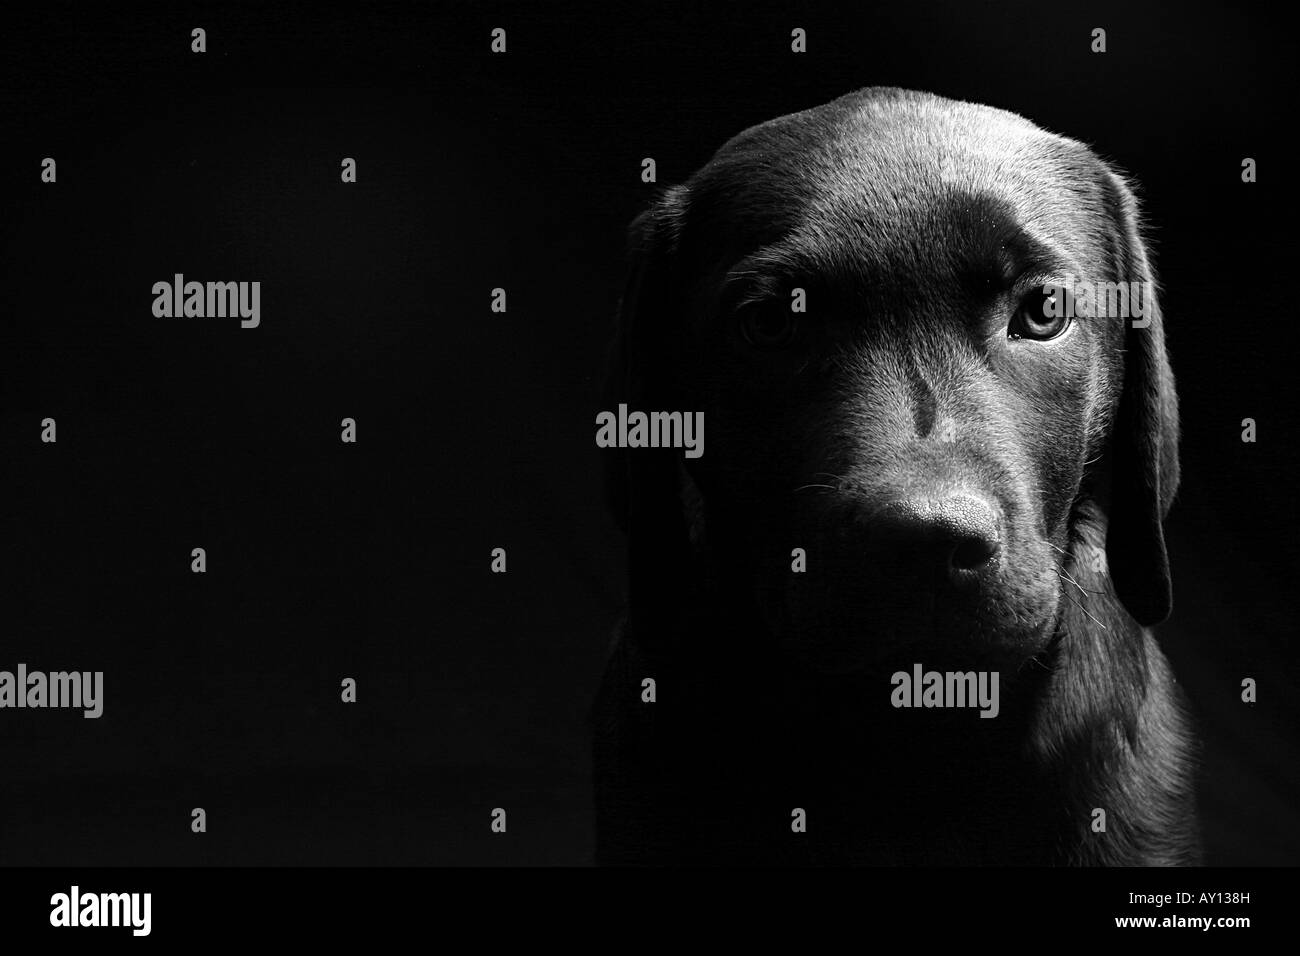 Labrador Puppy Head On in Black and White against a Black Background Stock Photo